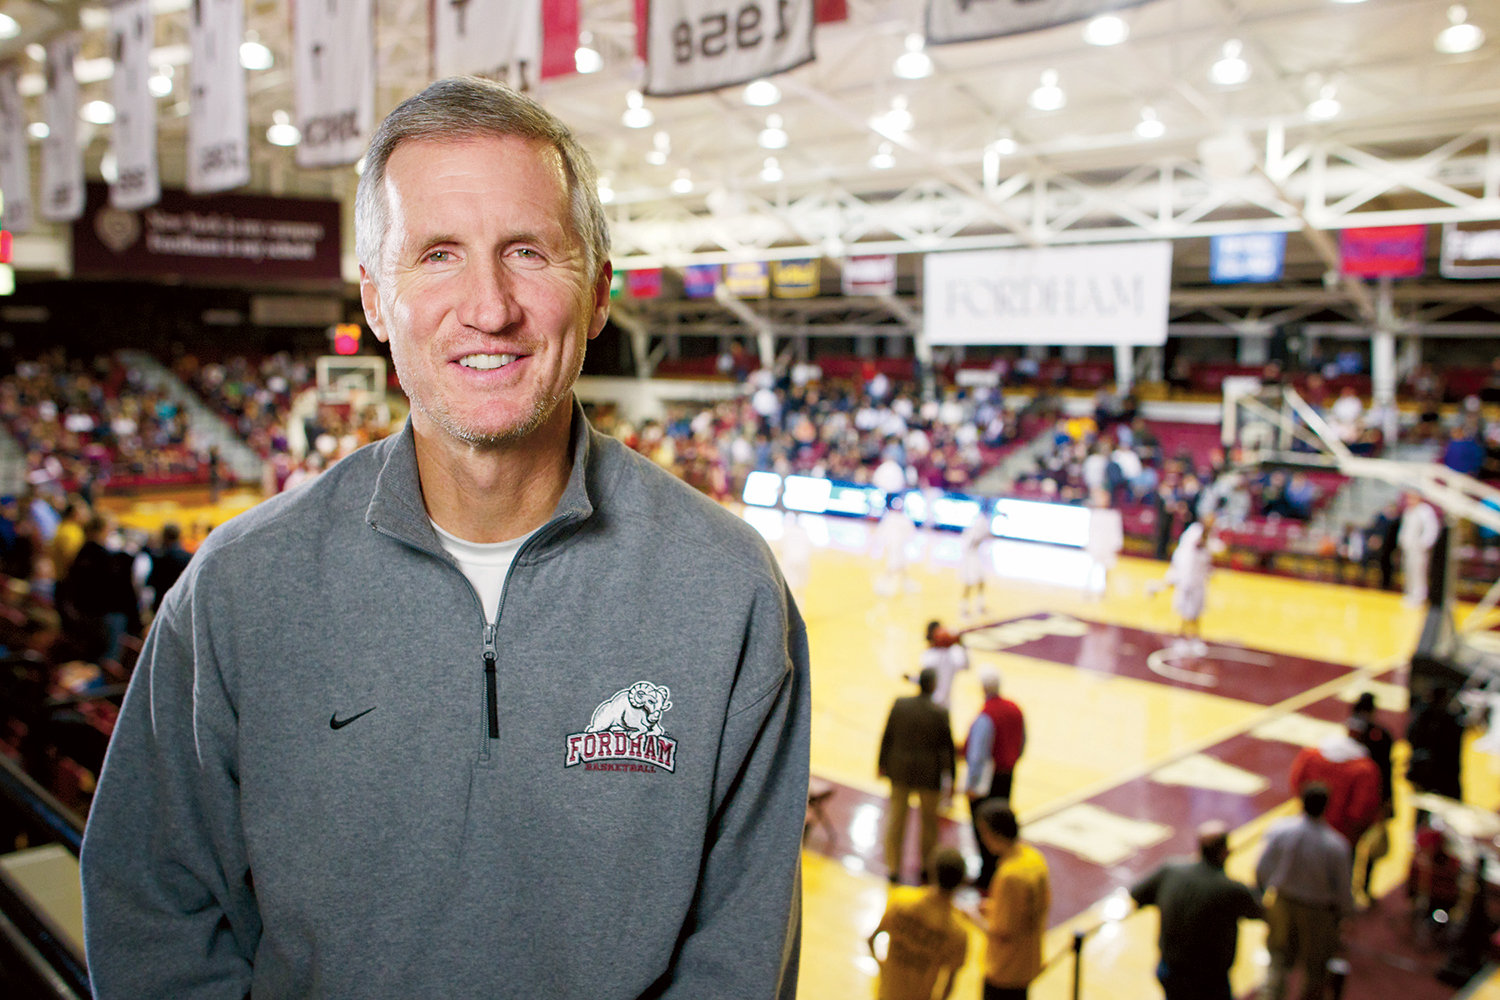 CALL TO HALL—Mike Breen, a 2020 winner of the Curt Gowdy Media Award for the Naismith Memorial Basketball Hall of Fame in Springfield, Mass., smiles at Rose Hill Gymnasium during a visit to his alma mater, Fordham University.